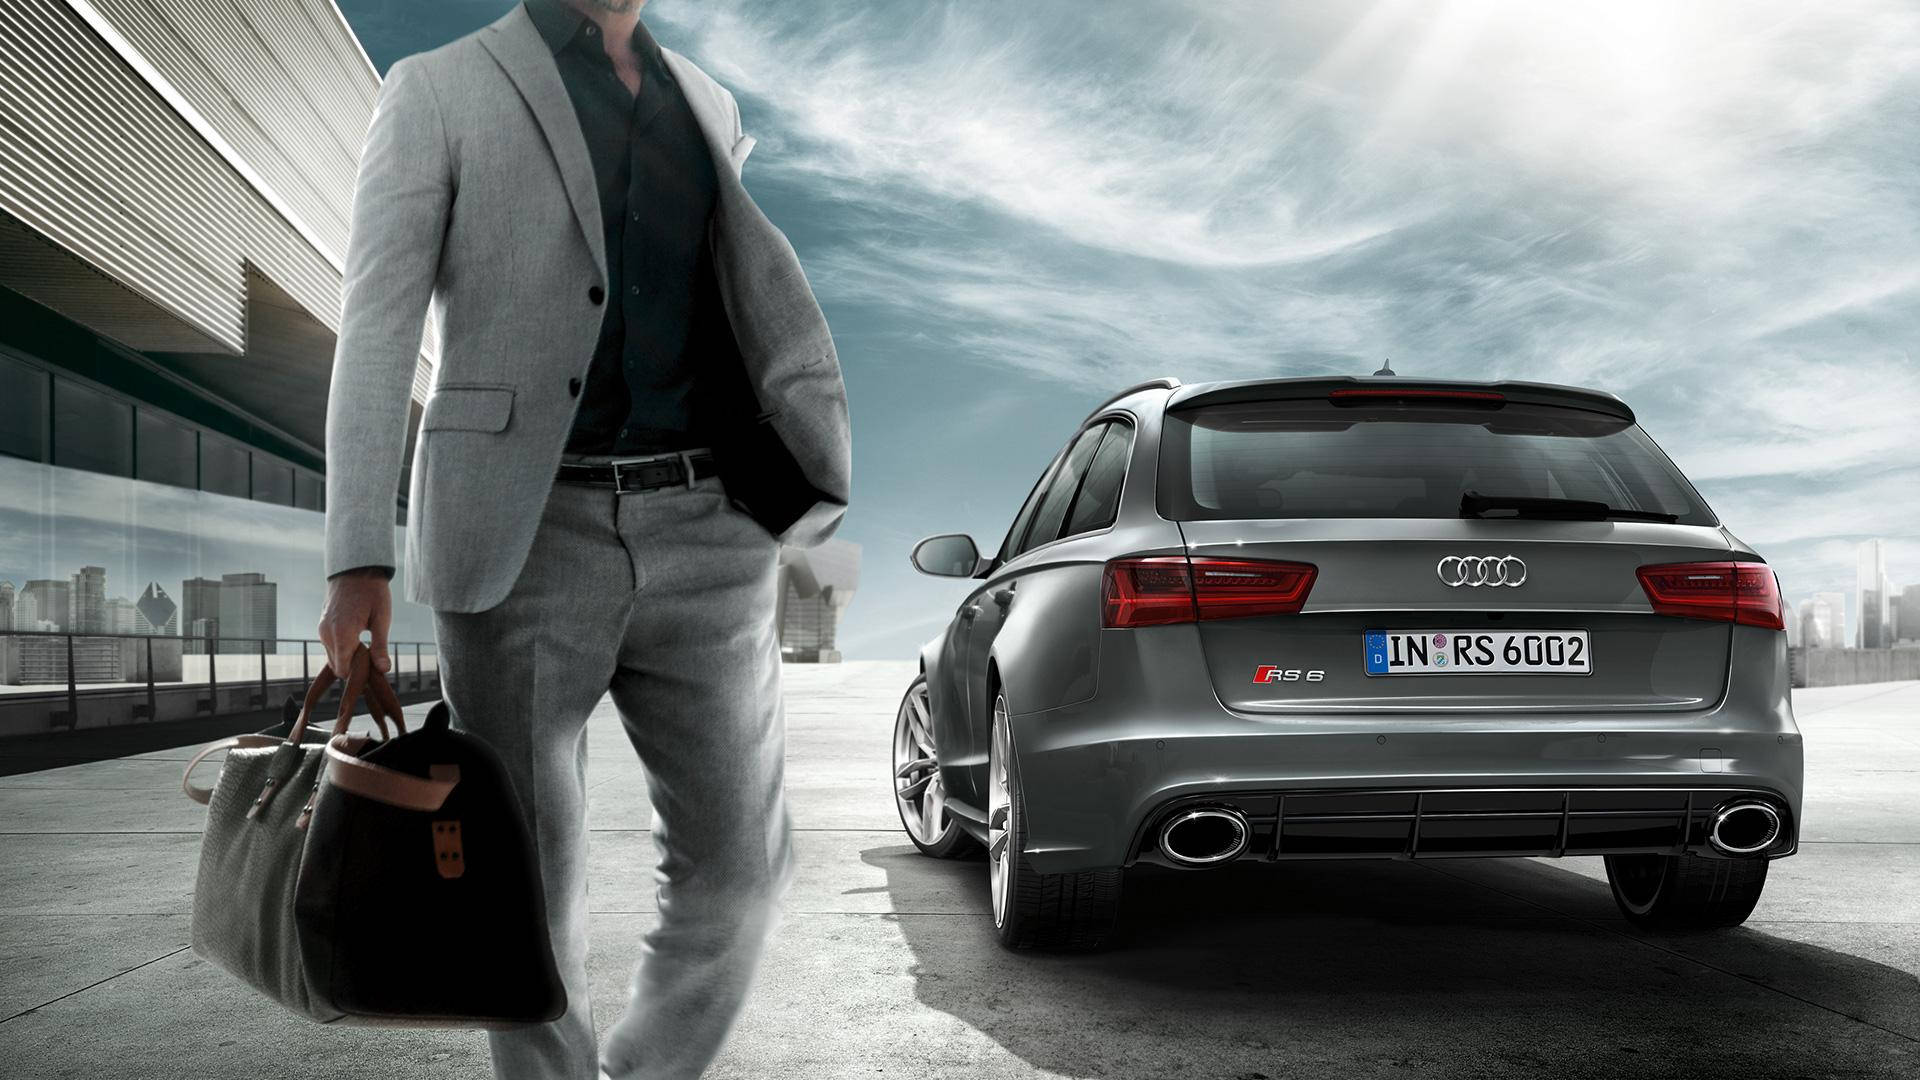 Businessman And His Audi RS Wallpaper